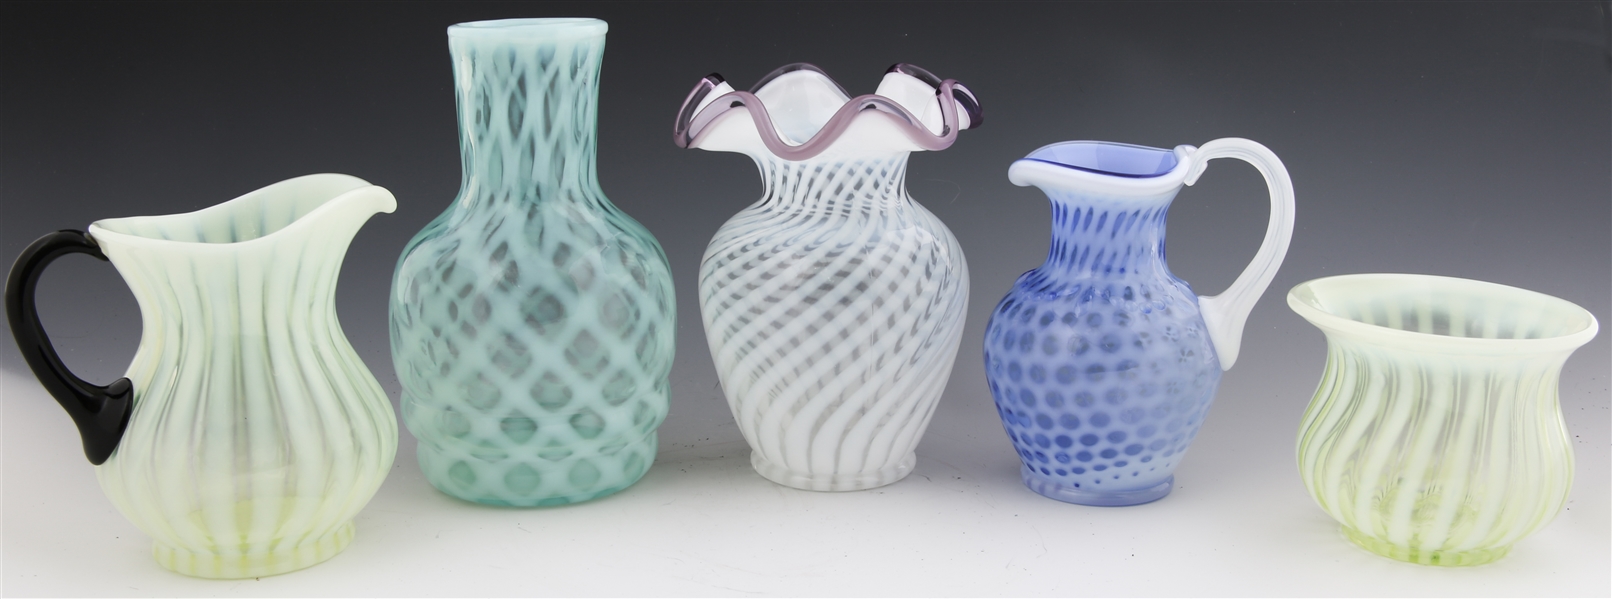 FENTON ART GLASS PITCHERS AND VASES - LOT OF 5